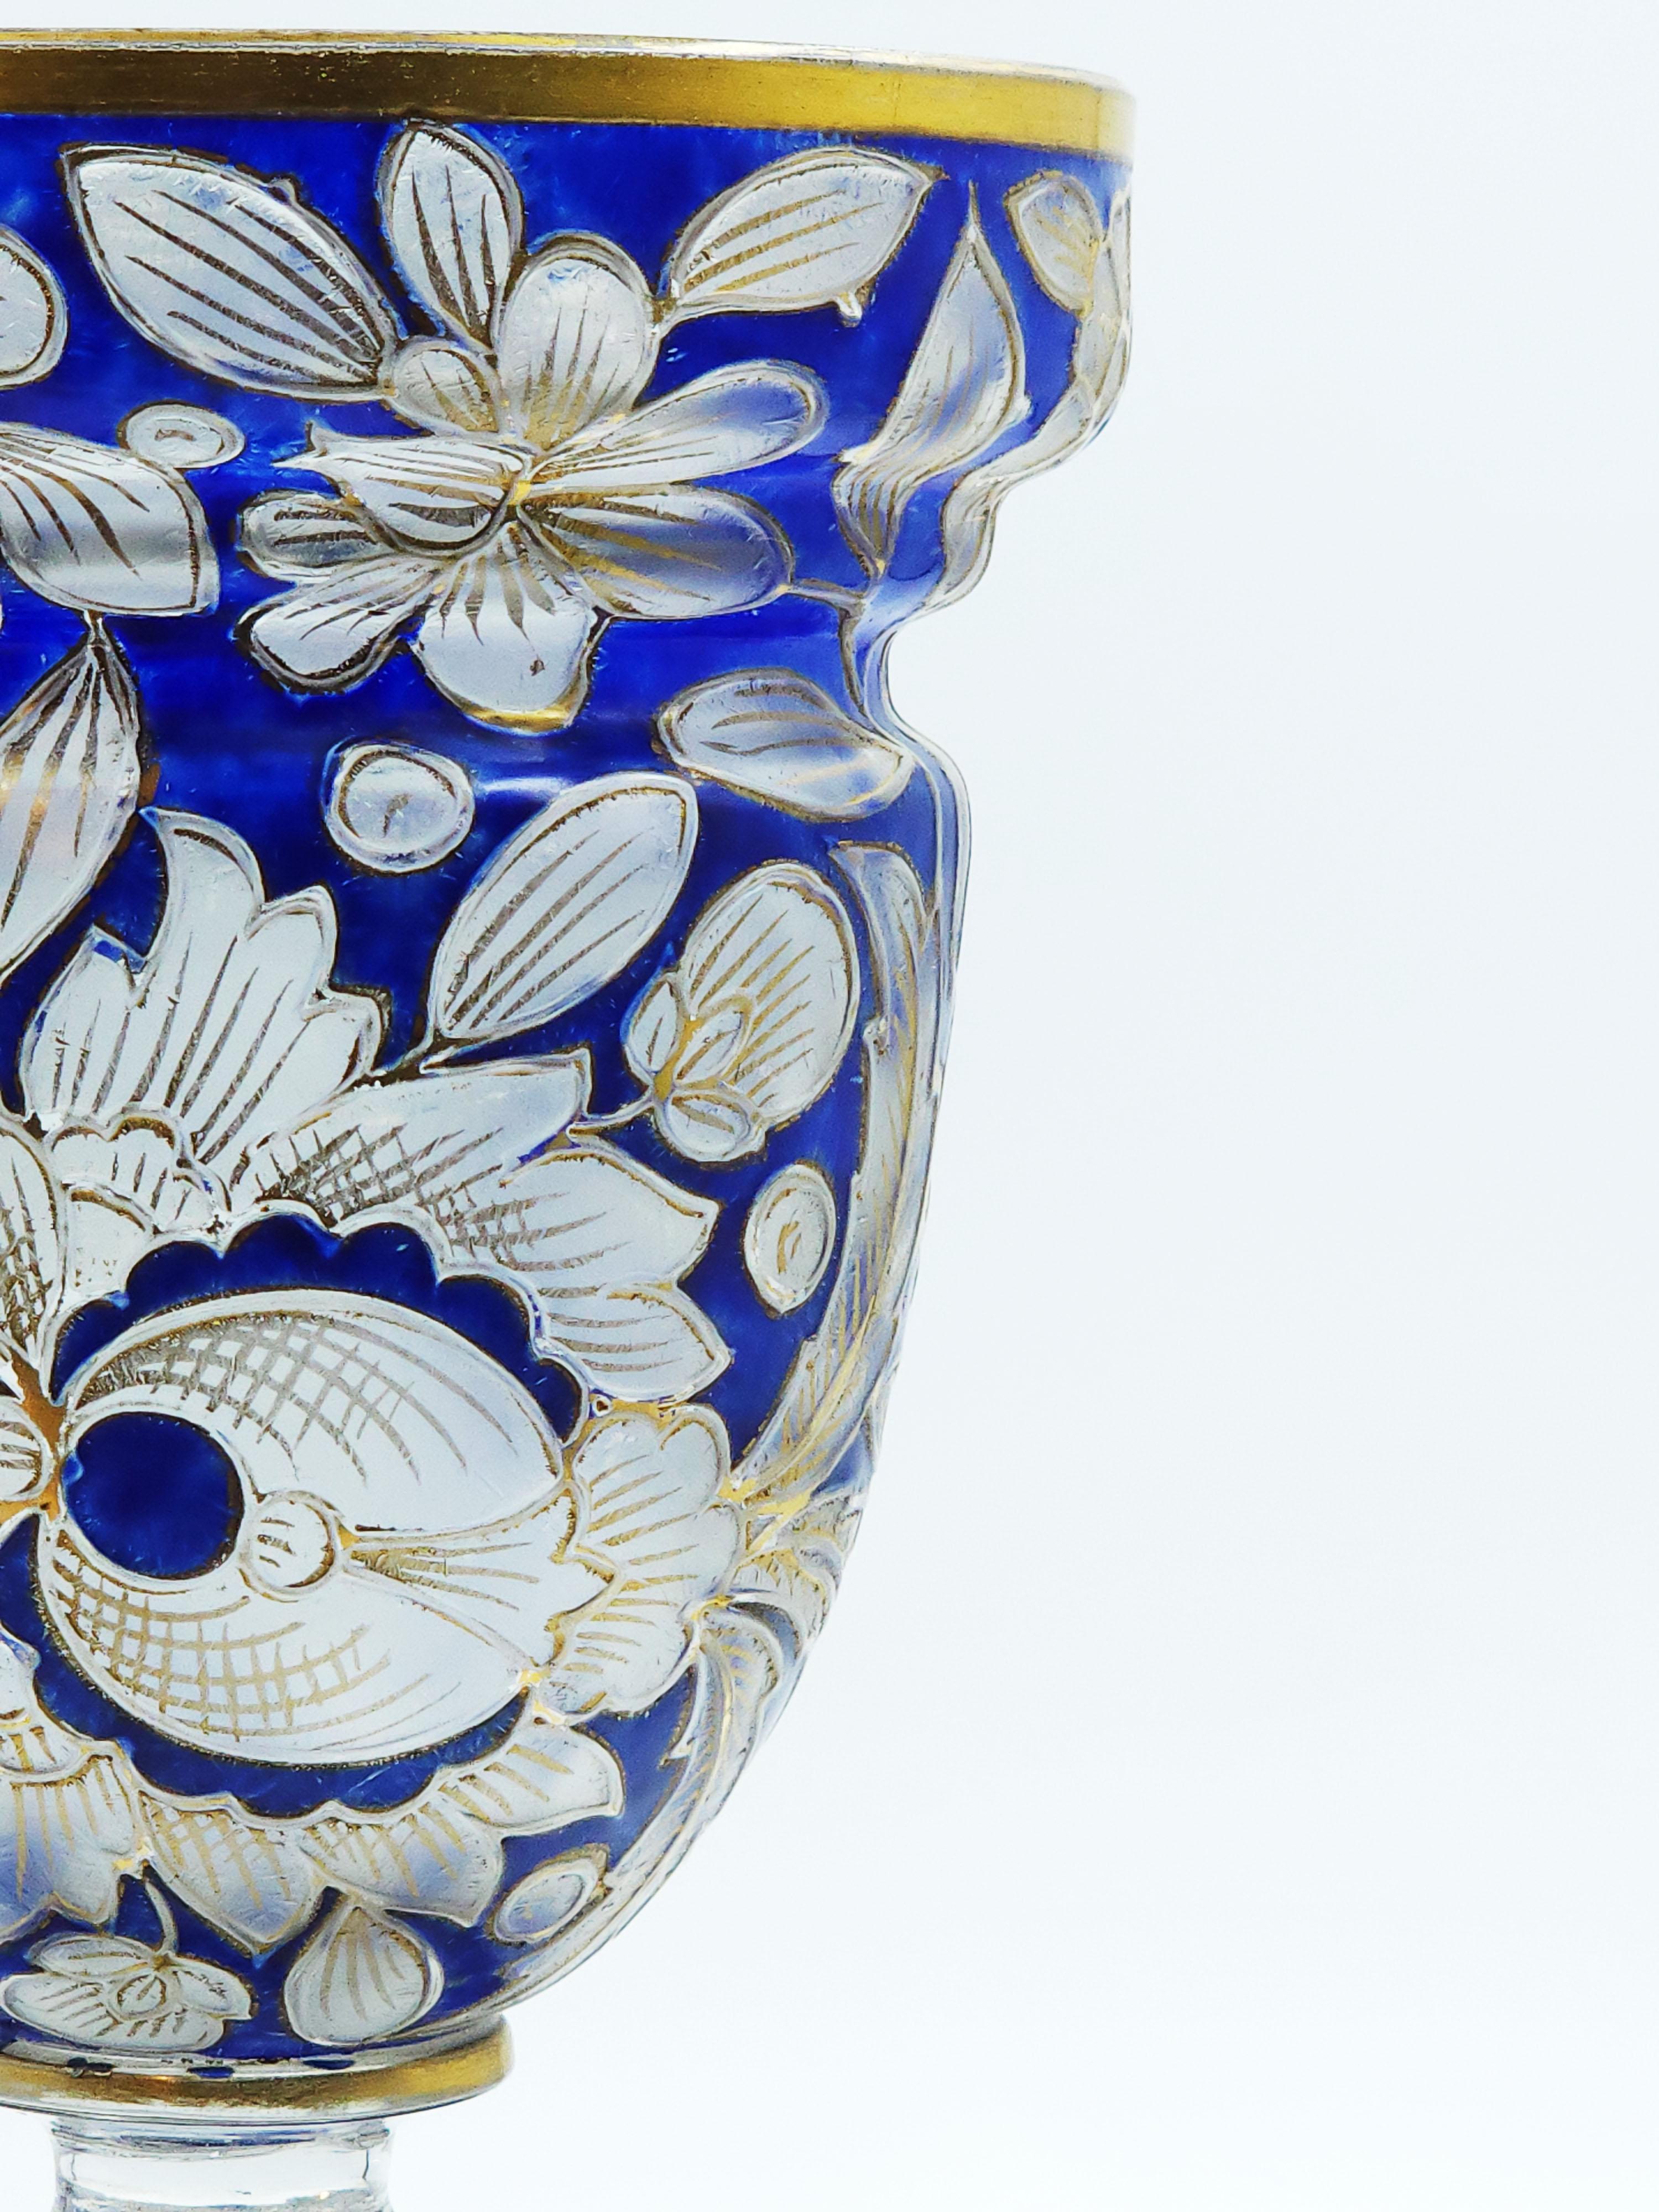 A Bohemian blue enamelled and gilt glass vase painting by Hermann Pautsch
colorless glass, stylized floral decor bordered in gold, gold lines on the edge - other area blue 
painting by Hermann Pautsch for the Julius Mühlhaus refinery.
Beautiful